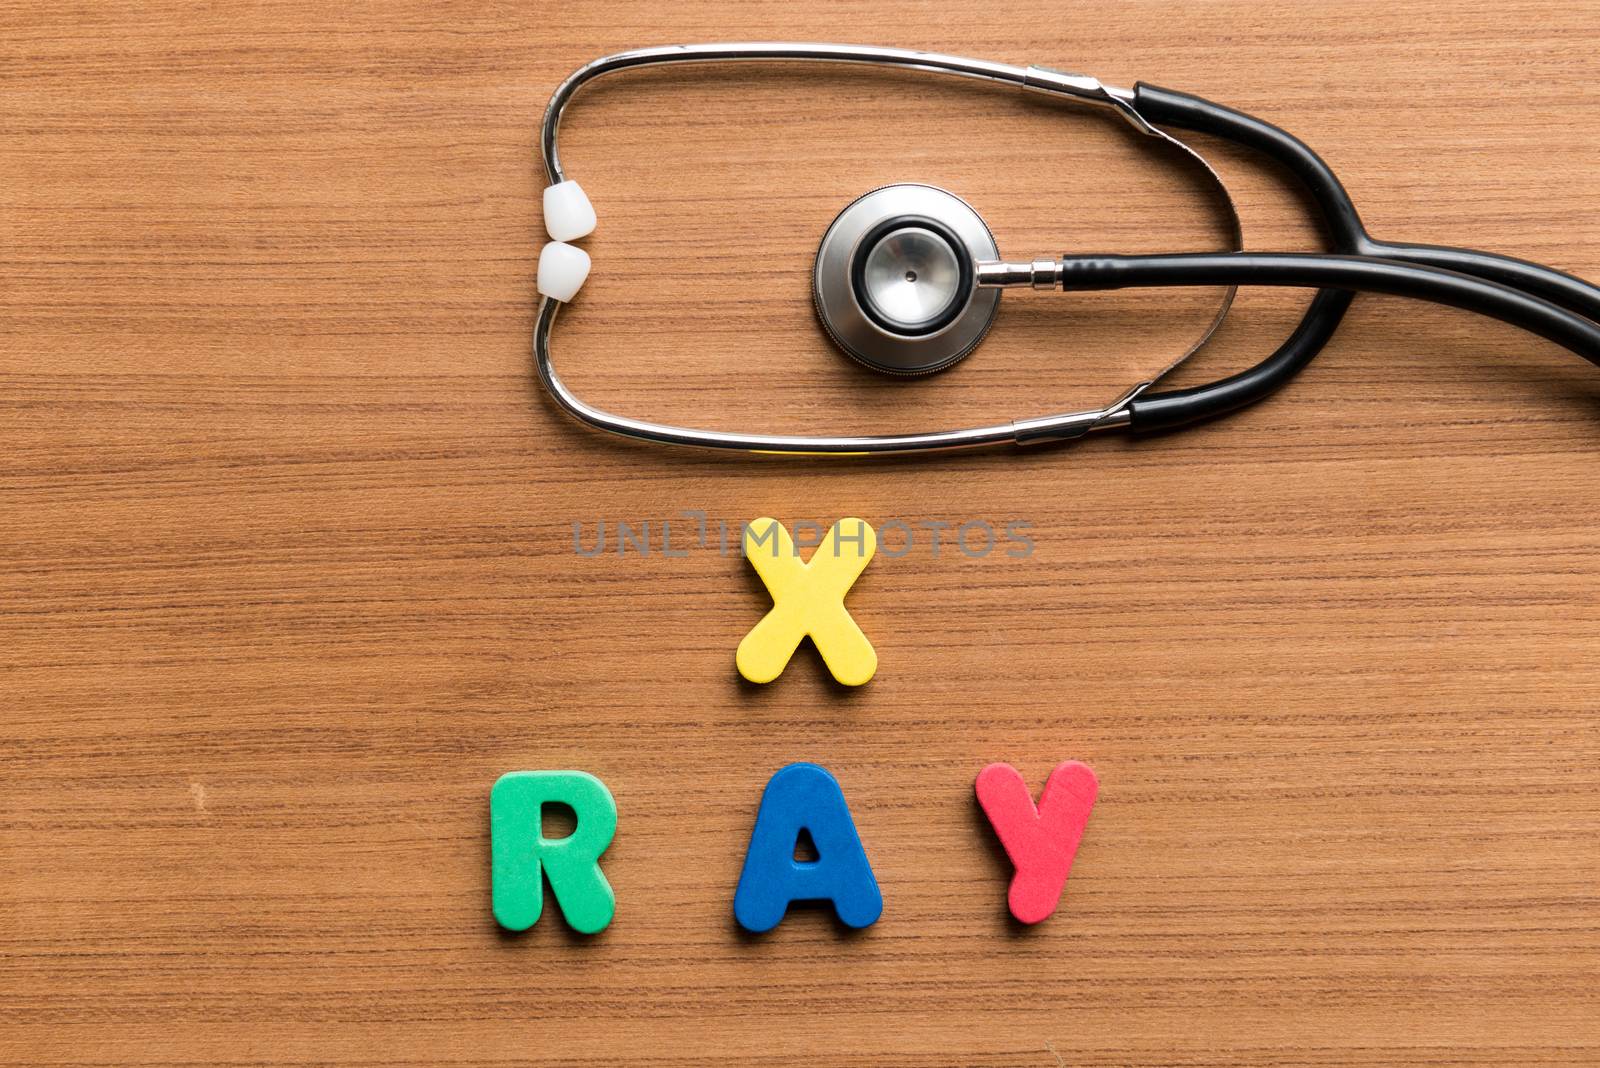 x ray colorful word with stethoscope by sohel.parvez@hotmail.com